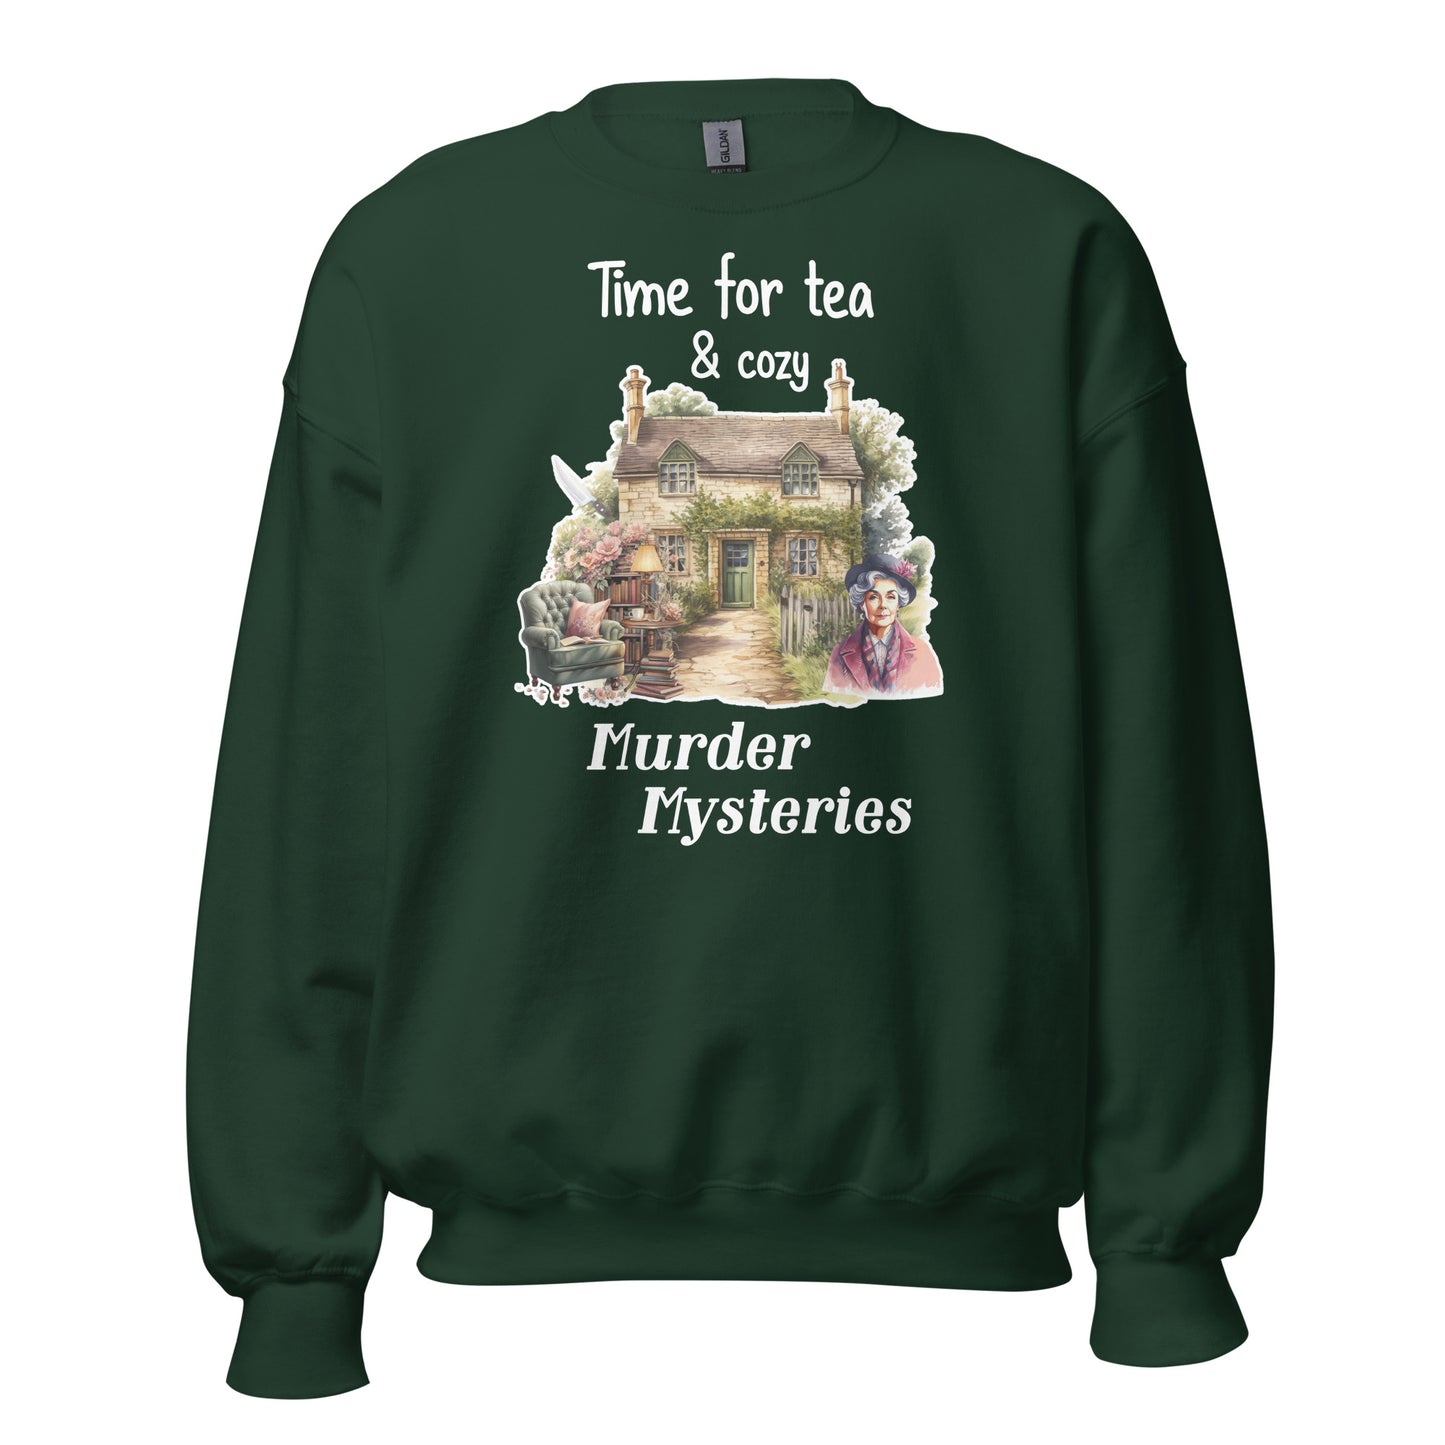 Tea and Murder Mysteries Cozy St. Mary Mead Cottage Sweatshirt